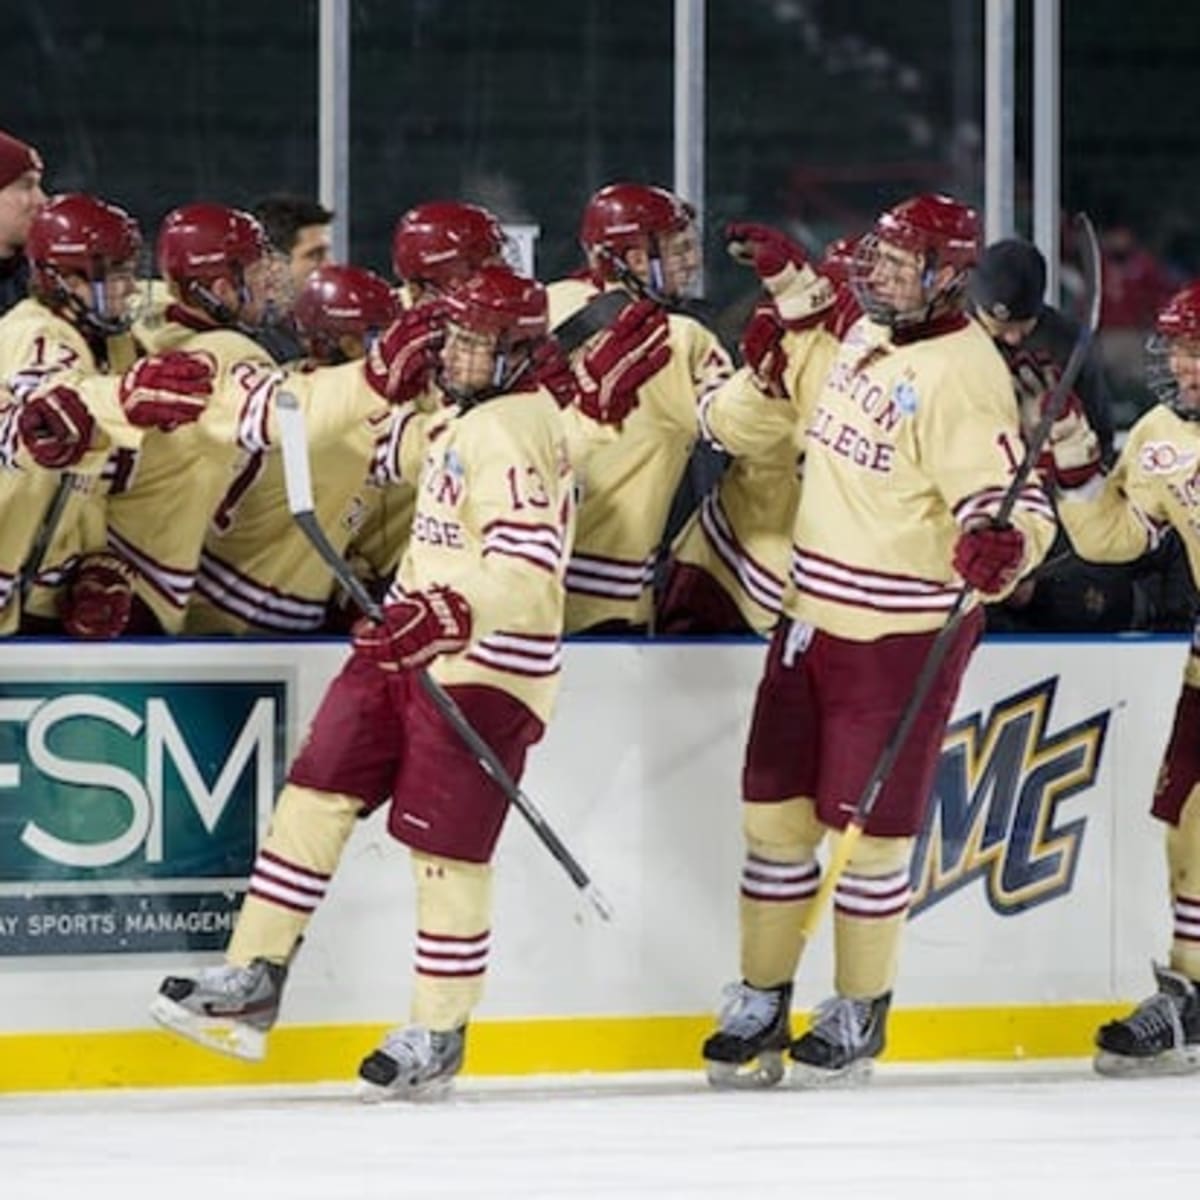 Hockey East 3 stars of the weekend: BC's Johnny Gaudreau and Kevin Hayes  are 1-2 - SB Nation College Hockey